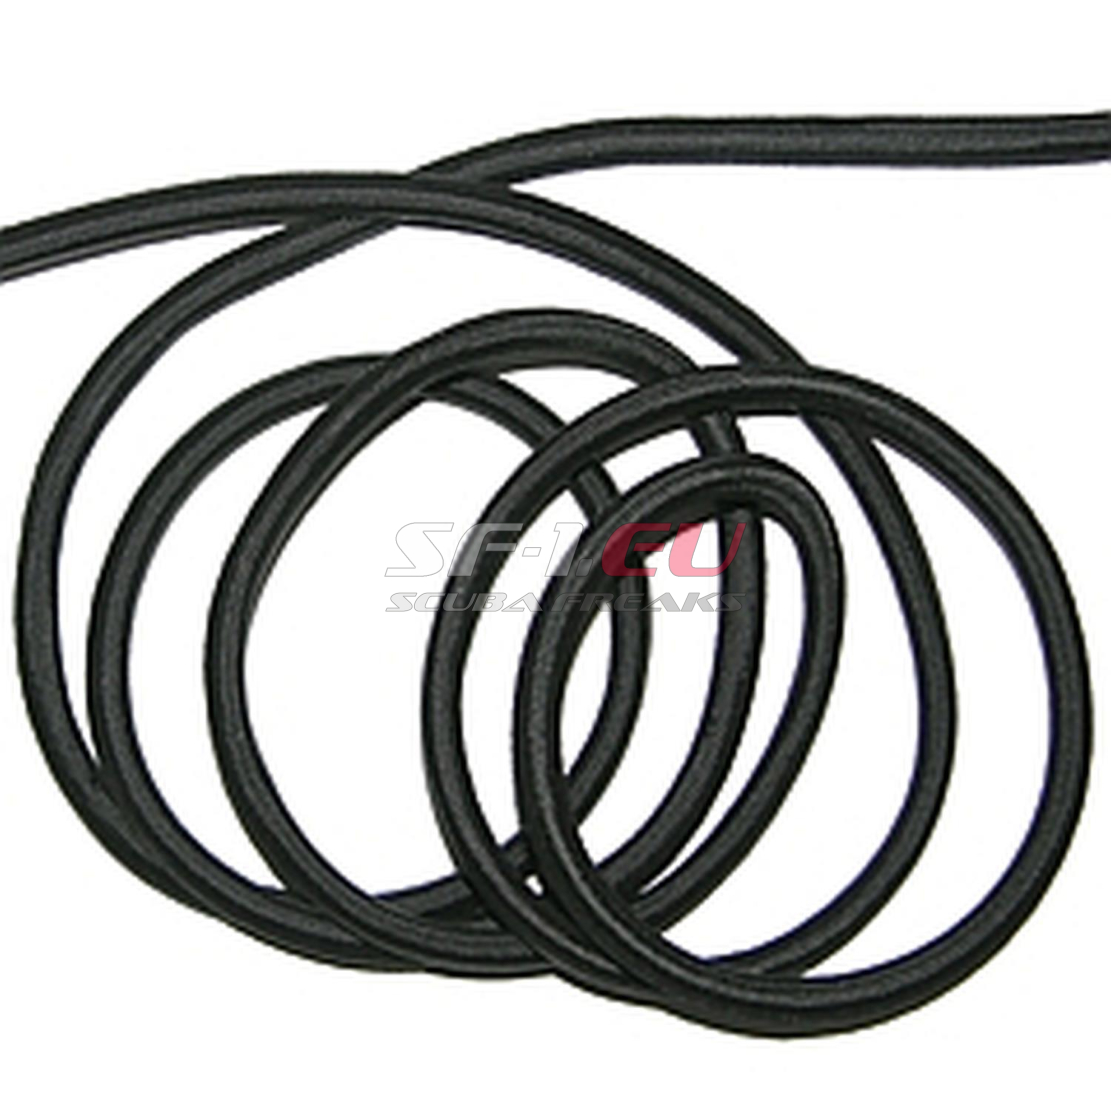 Xray-Scuba Surgical Tubing 6mm schwarz Silikonschlauch Bungee Cord 